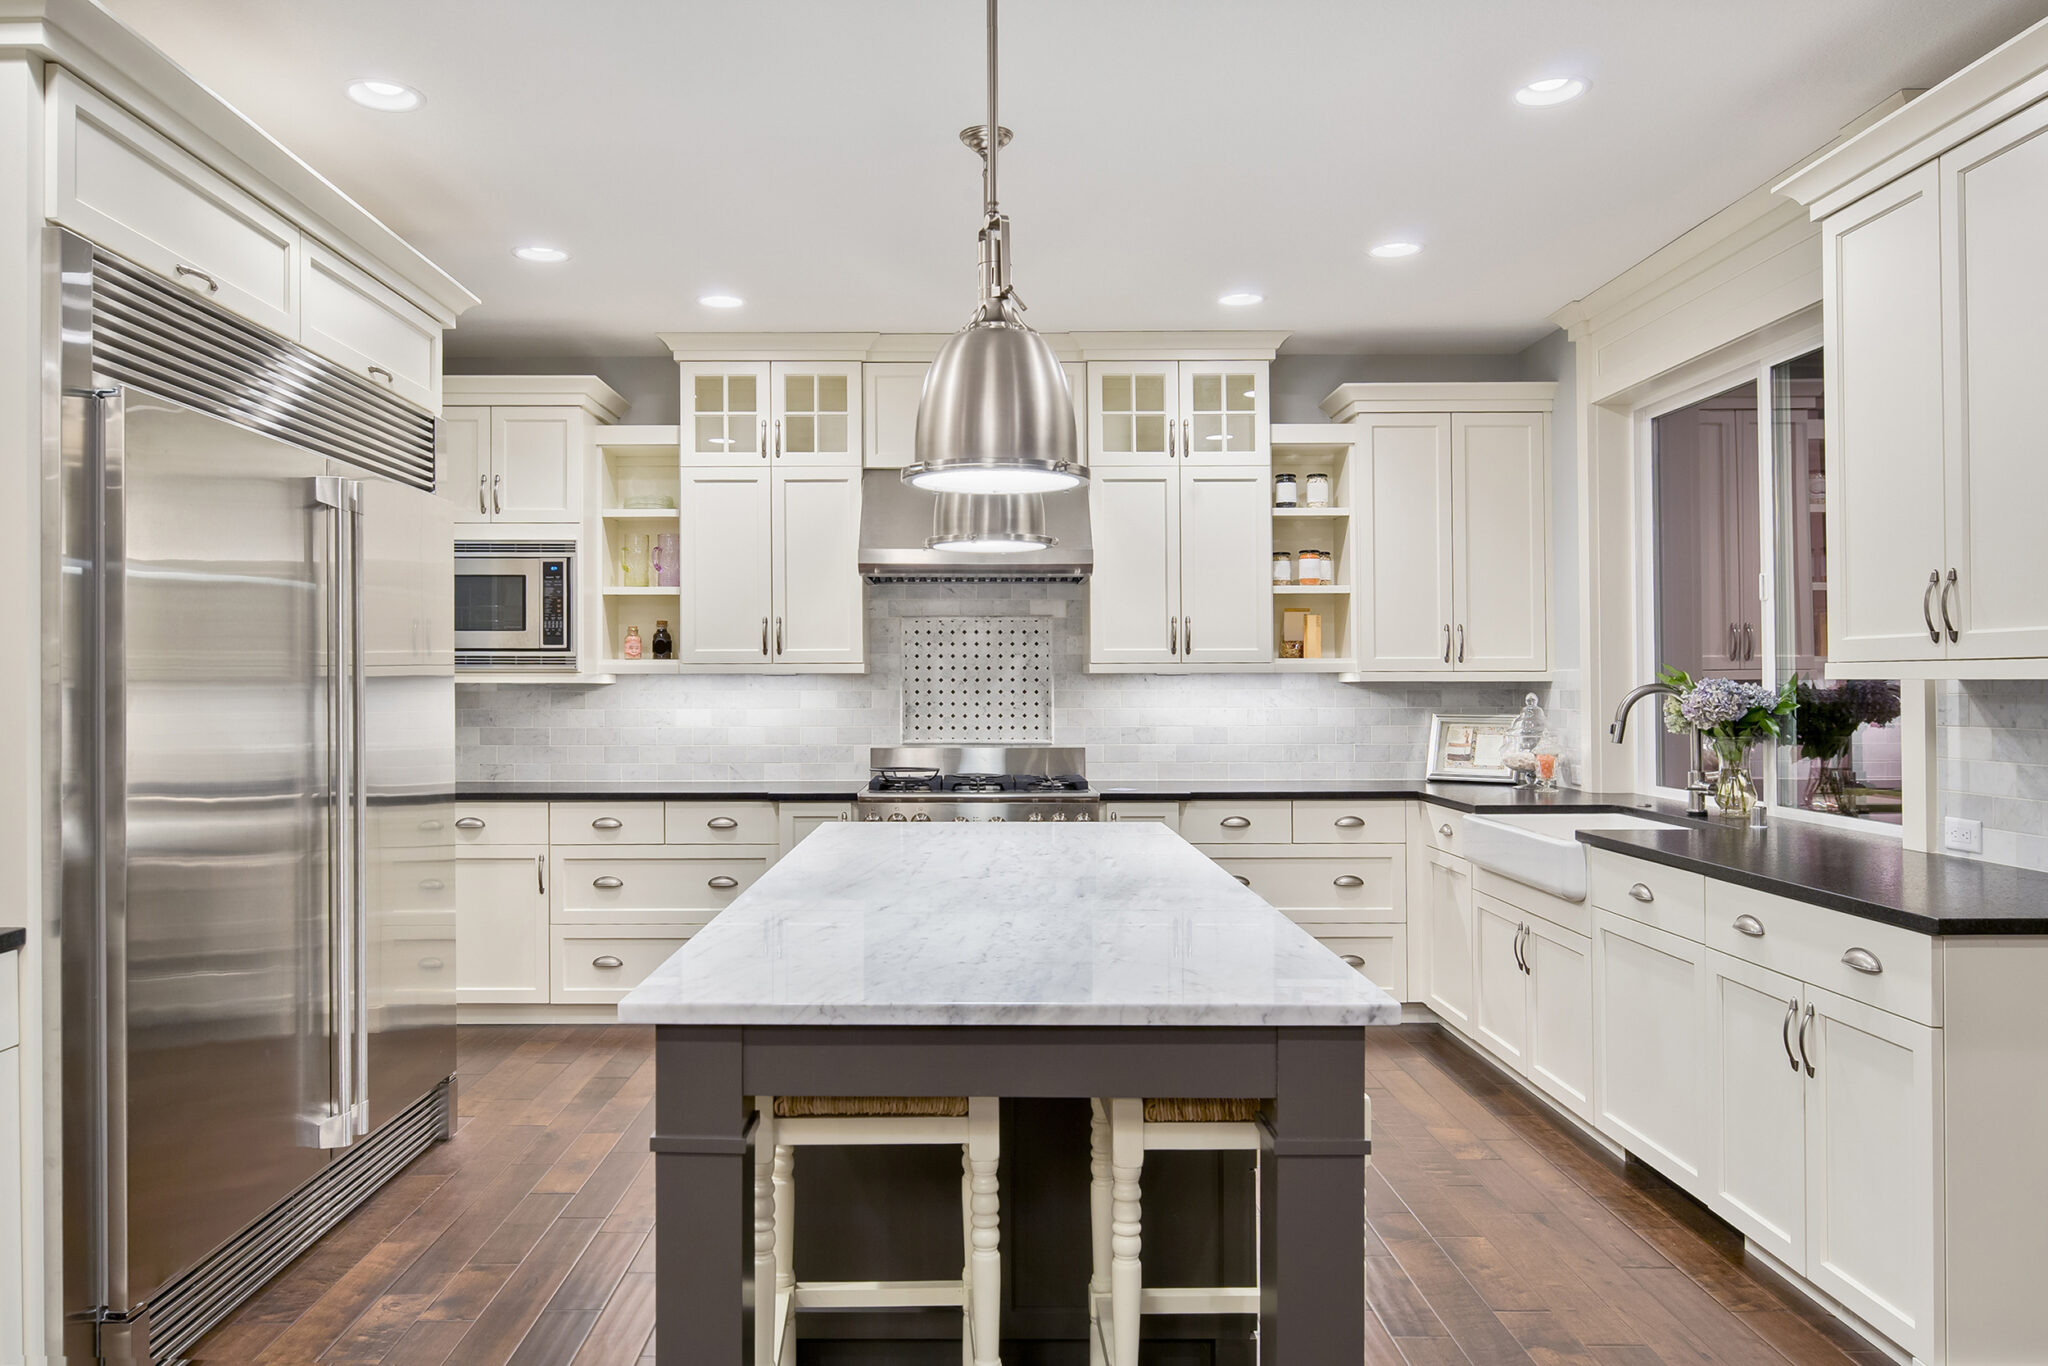 Light Spacious kitchen style with cream shaker cabinets, black countertops and centered kitchen island with white countertop